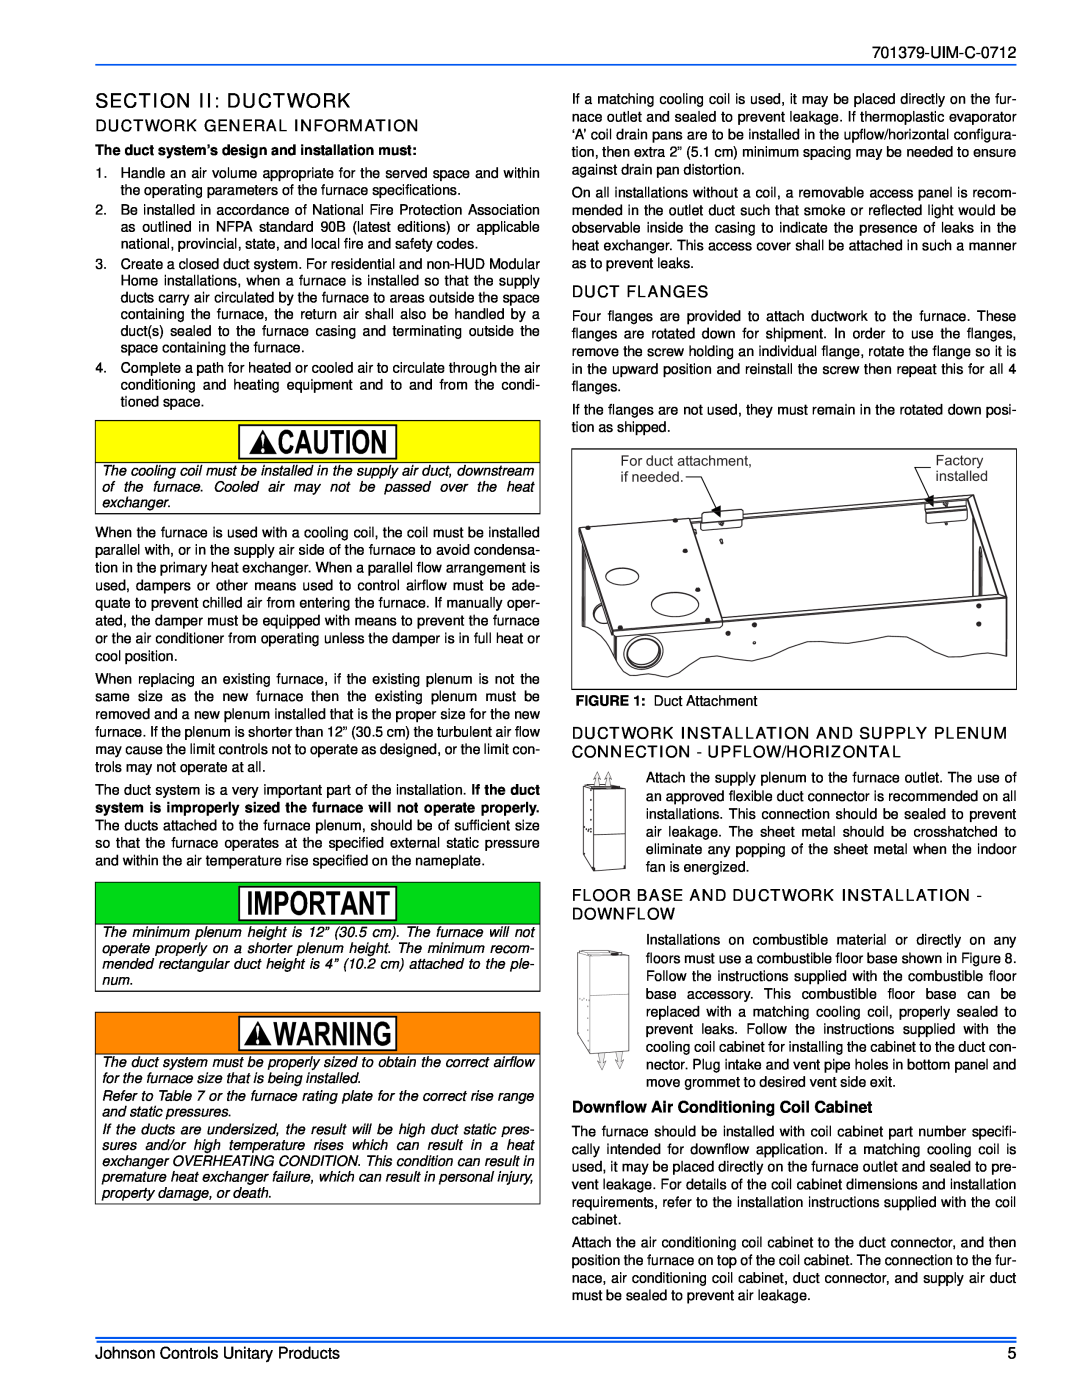 Johnson Controls TM9V*MP installation manual Section Ii Ductwork, UIM-C-0712, Ductwork General Information, Duct Flanges 